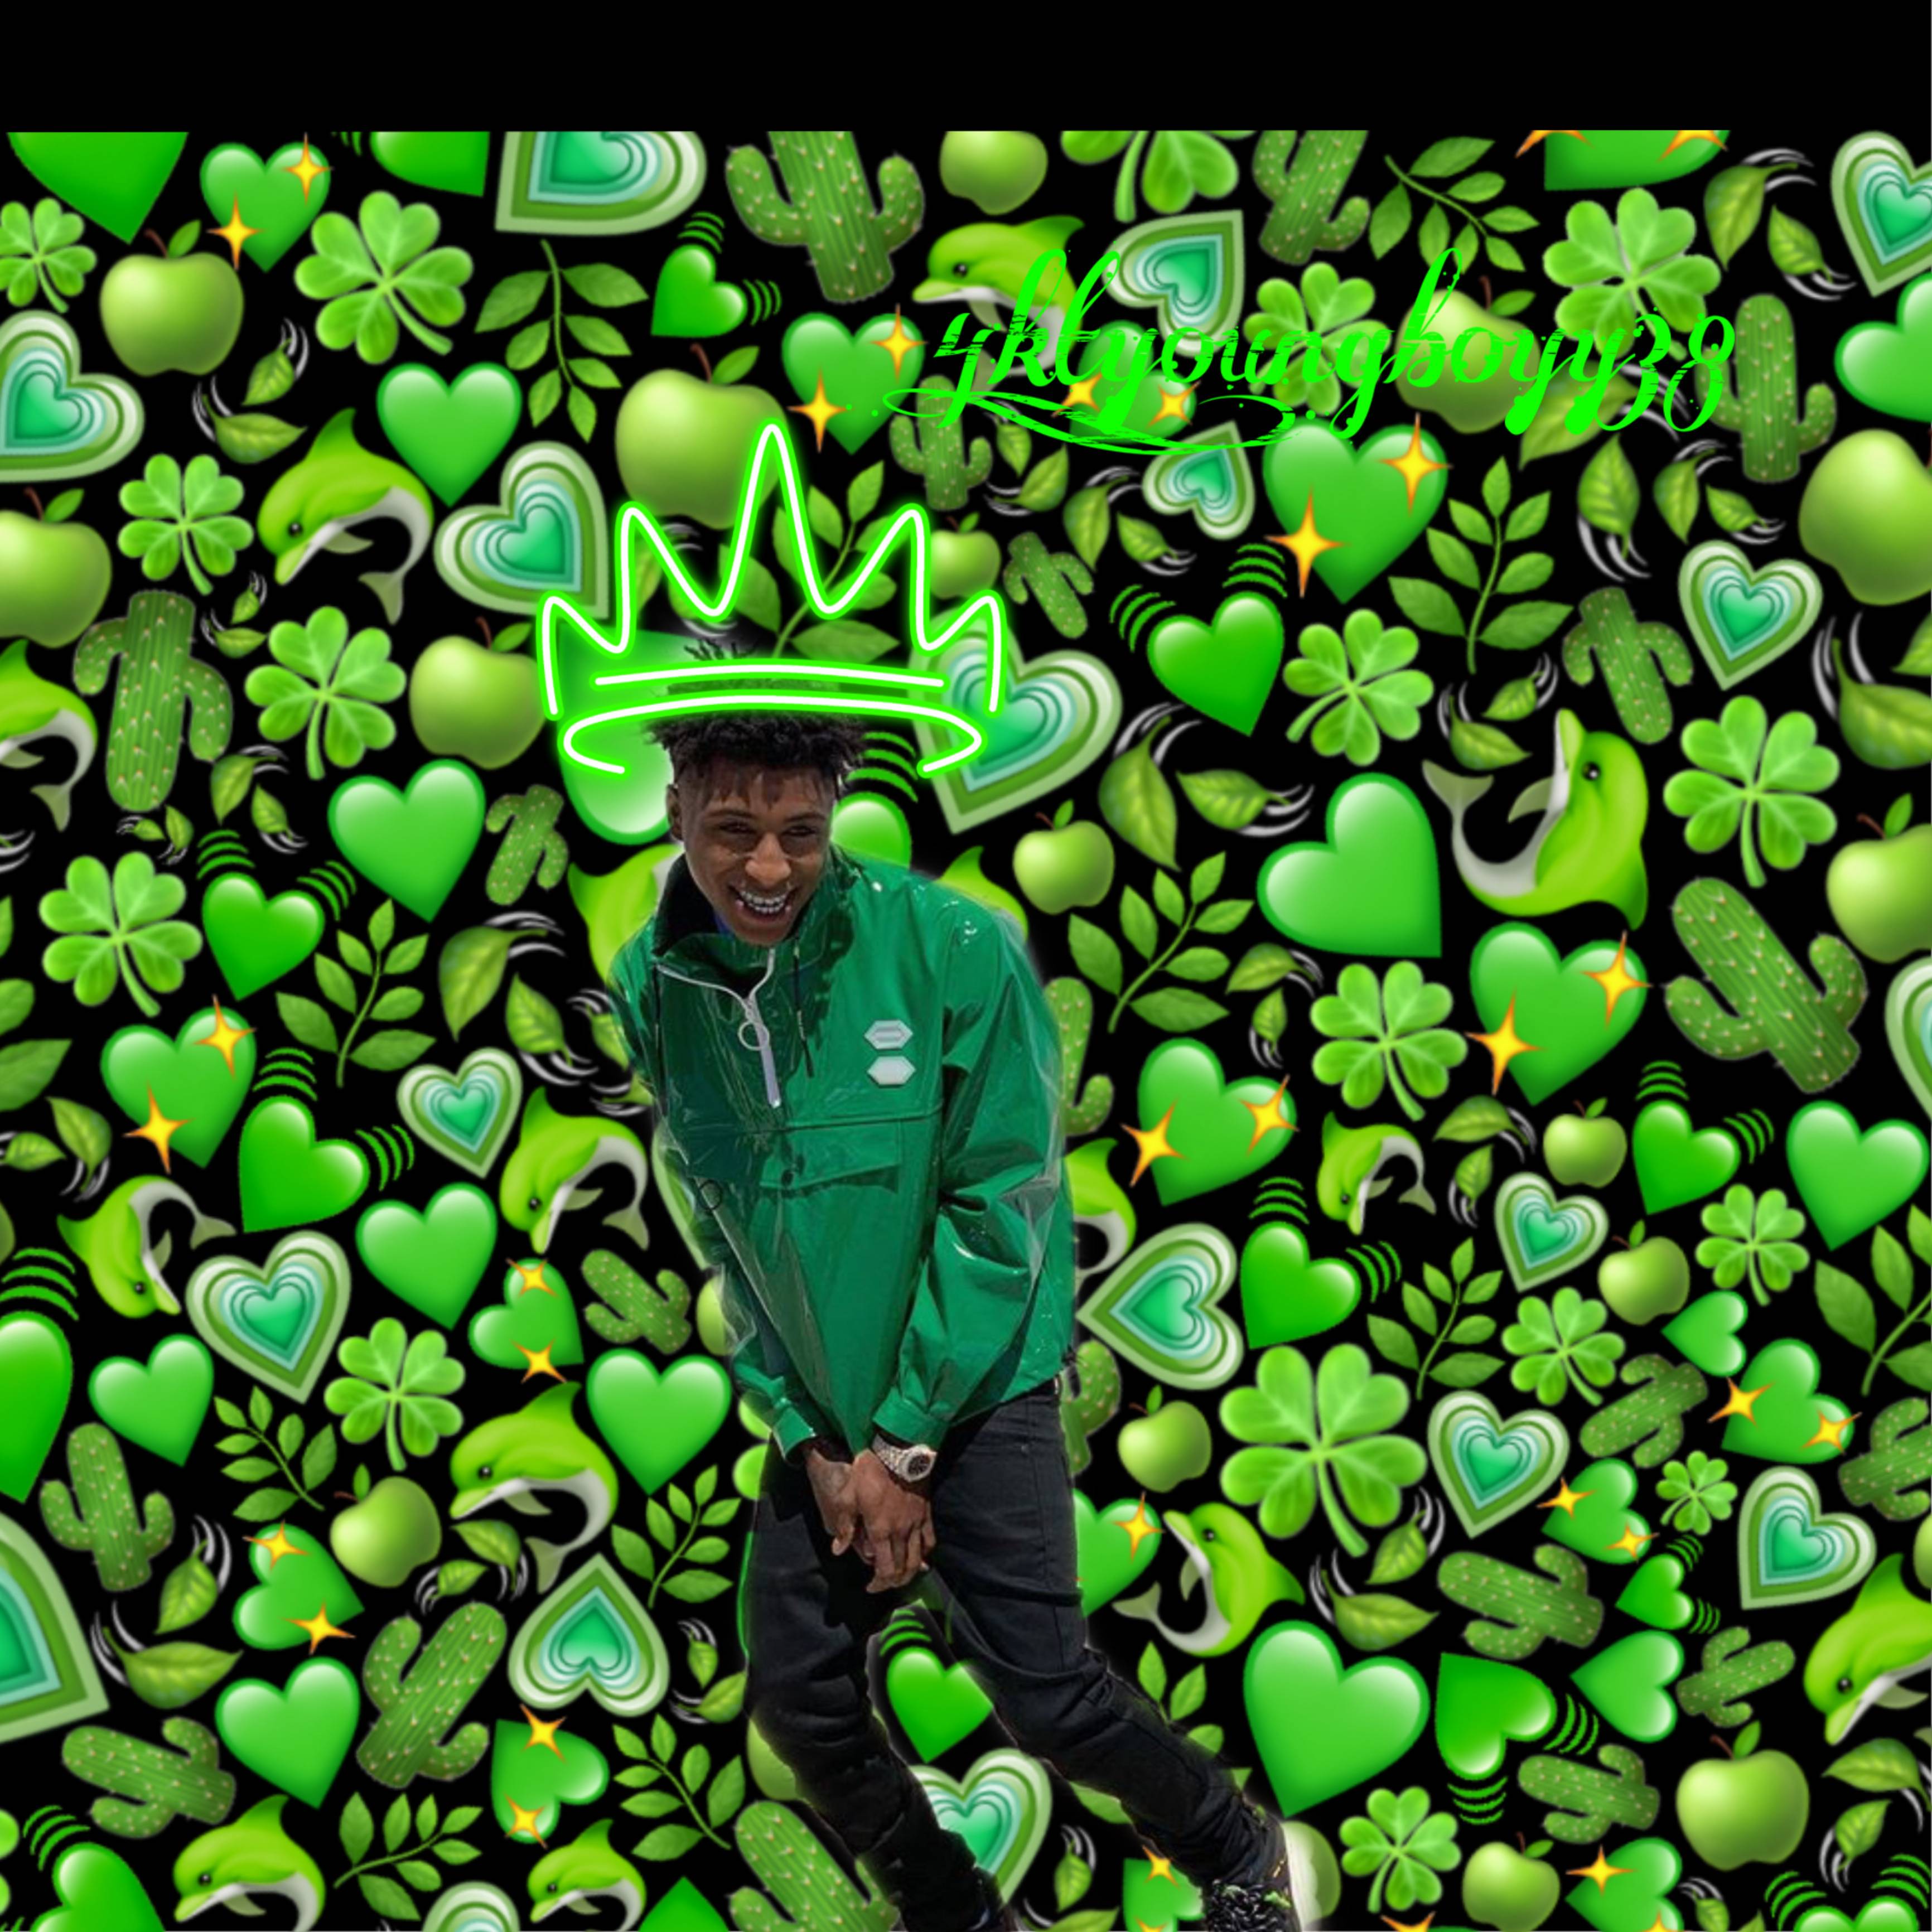 Details 56+ nba youngboy wallpaper green - in.cdgdbentre